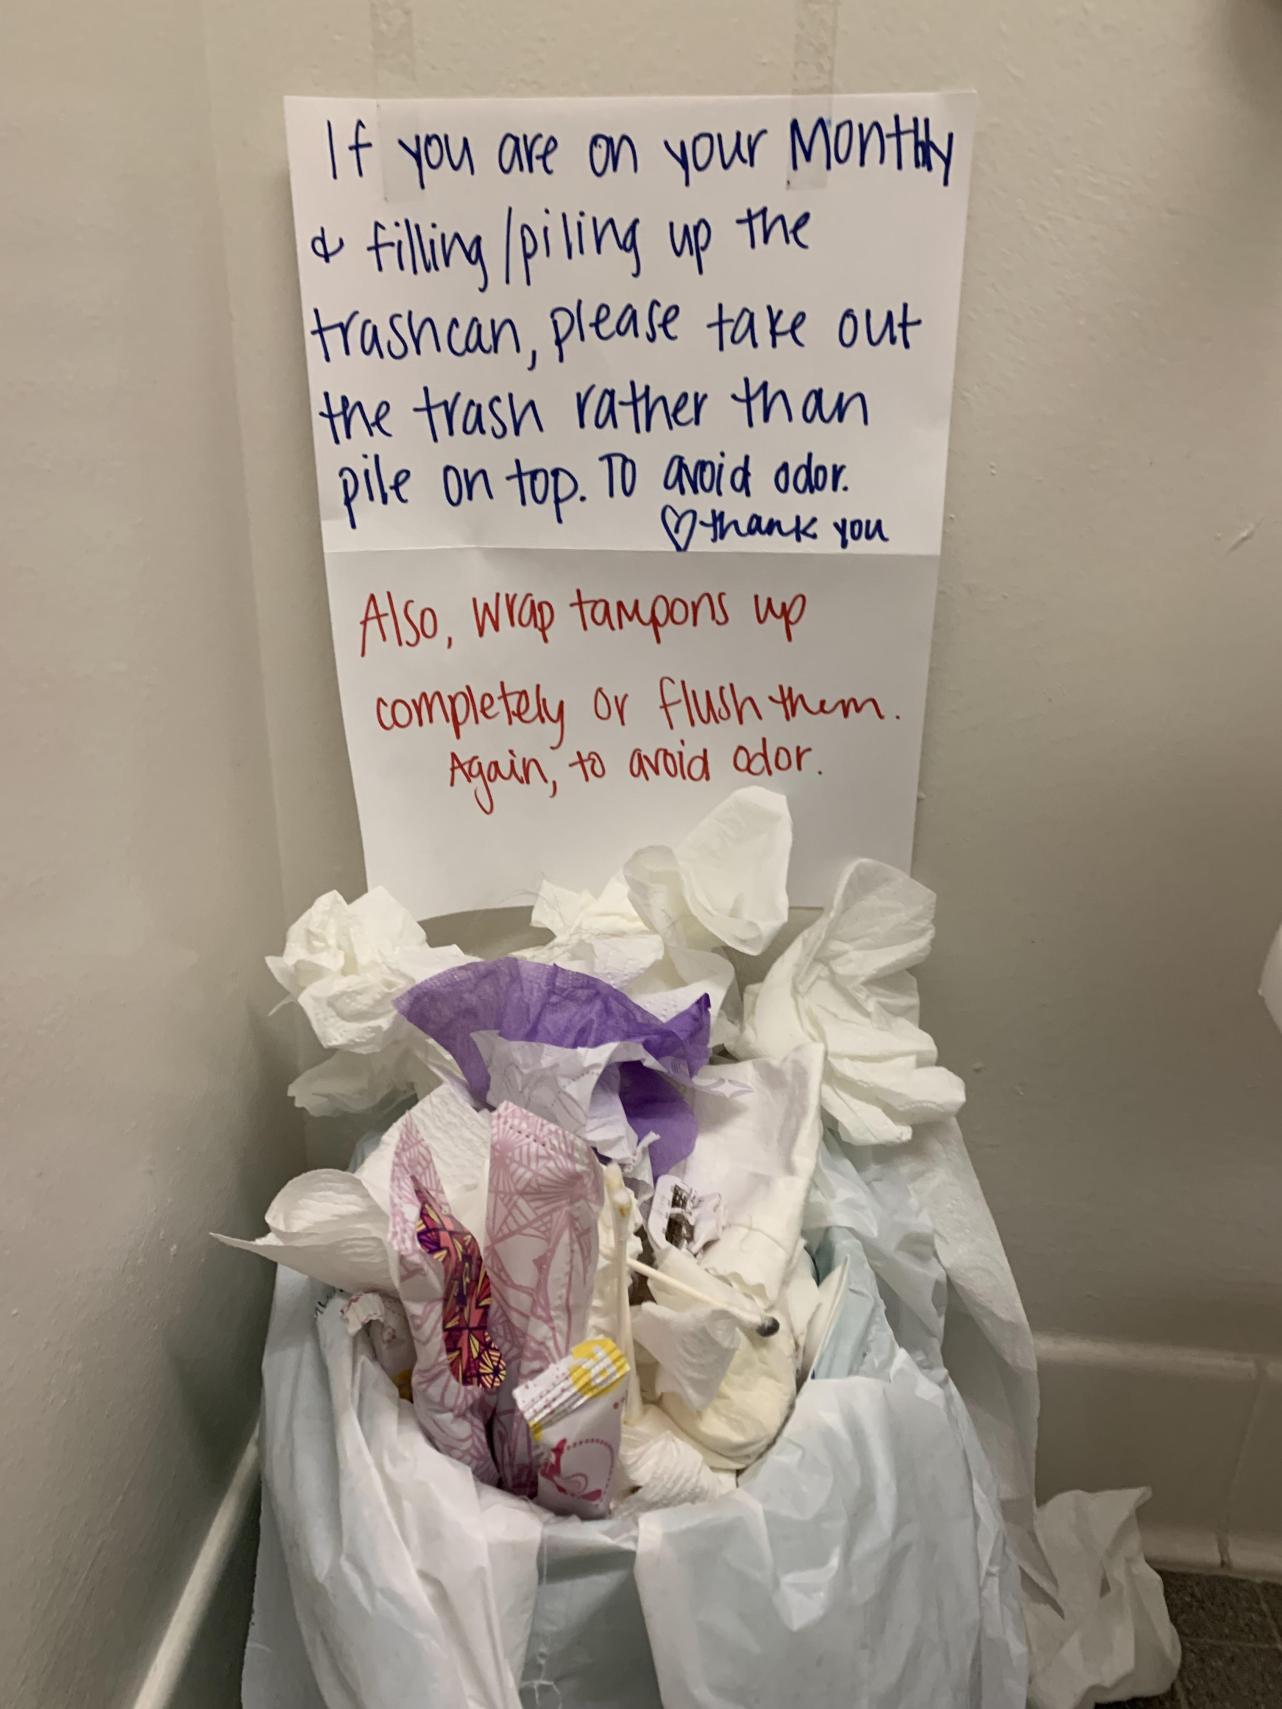 petal - If you are on your monthly & filling piling up the trashcan, please take out the trash rather than | pile on top. To avoid odor. thank you Also, wrap tampons up completely or flush them. Again, to avoid odor.